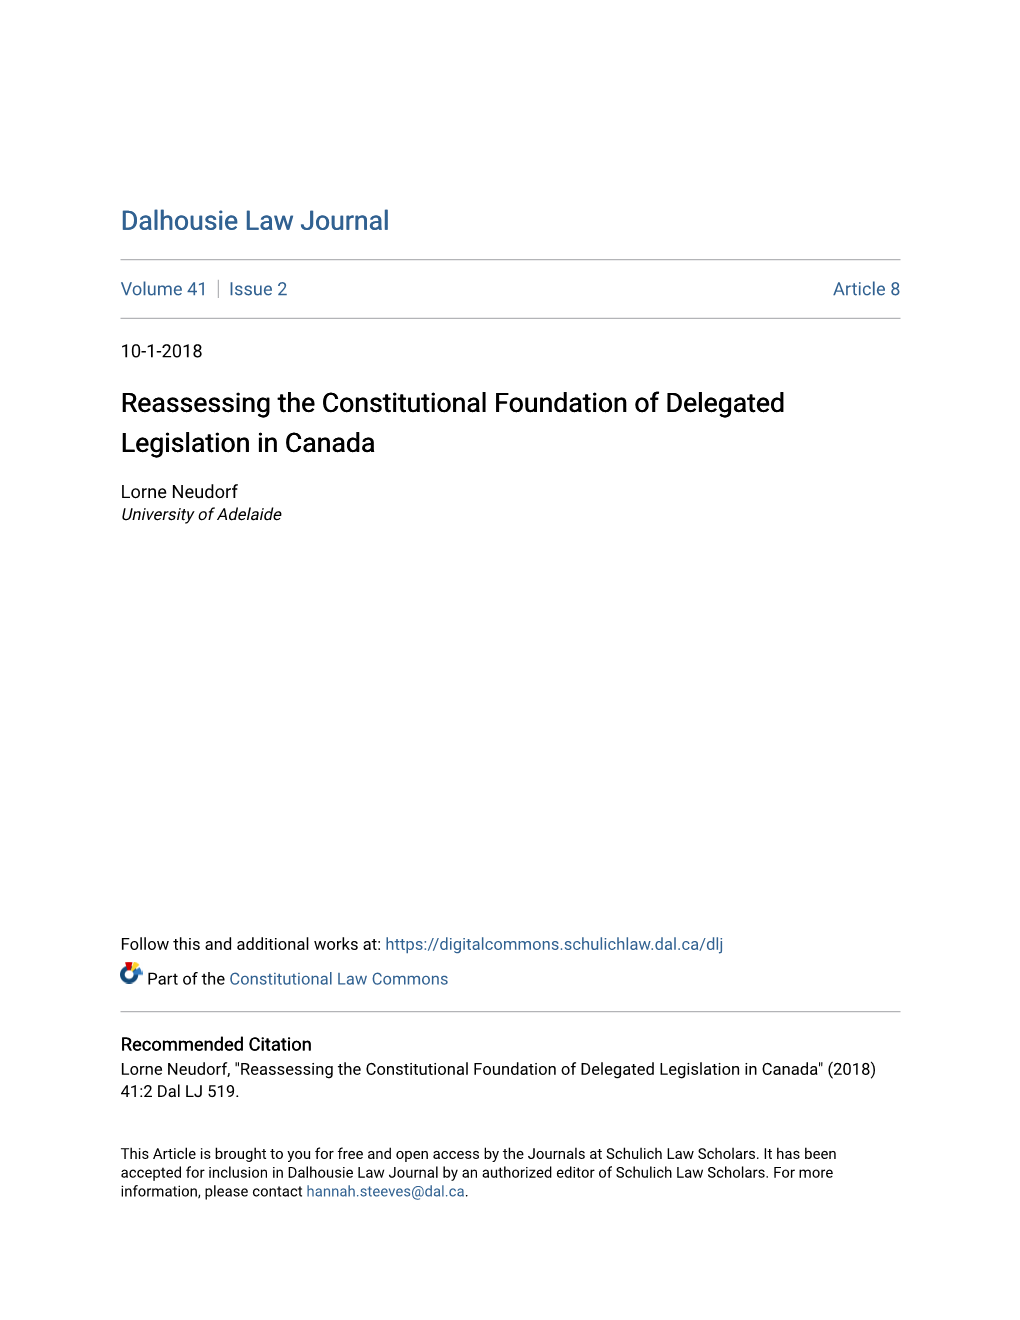 Reassessing the Constitutional Foundation of Delegated Legislation in Canada